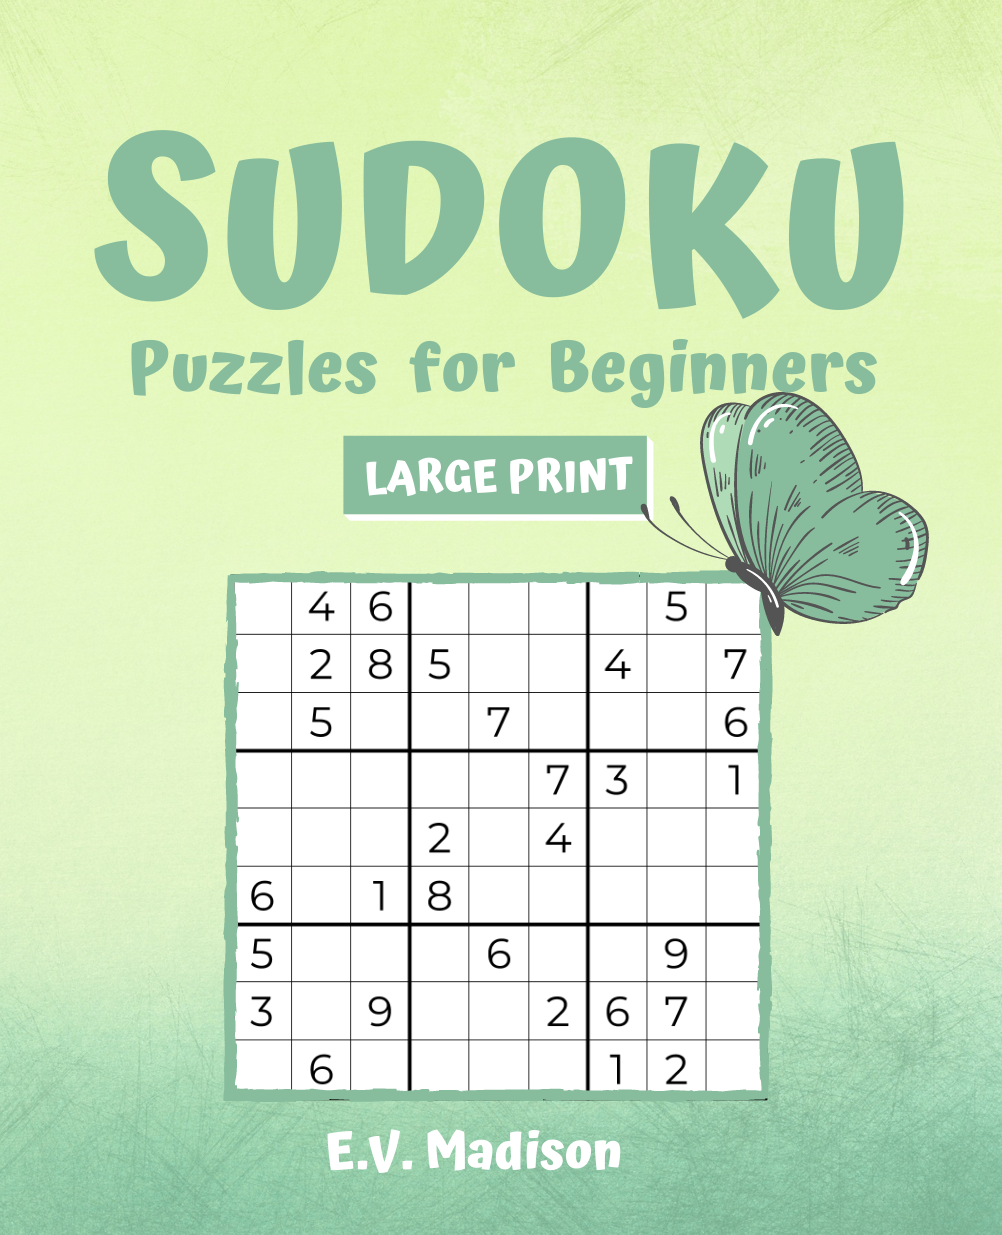 SUDOKU Puzzles for Beginners - LARGE PRINT